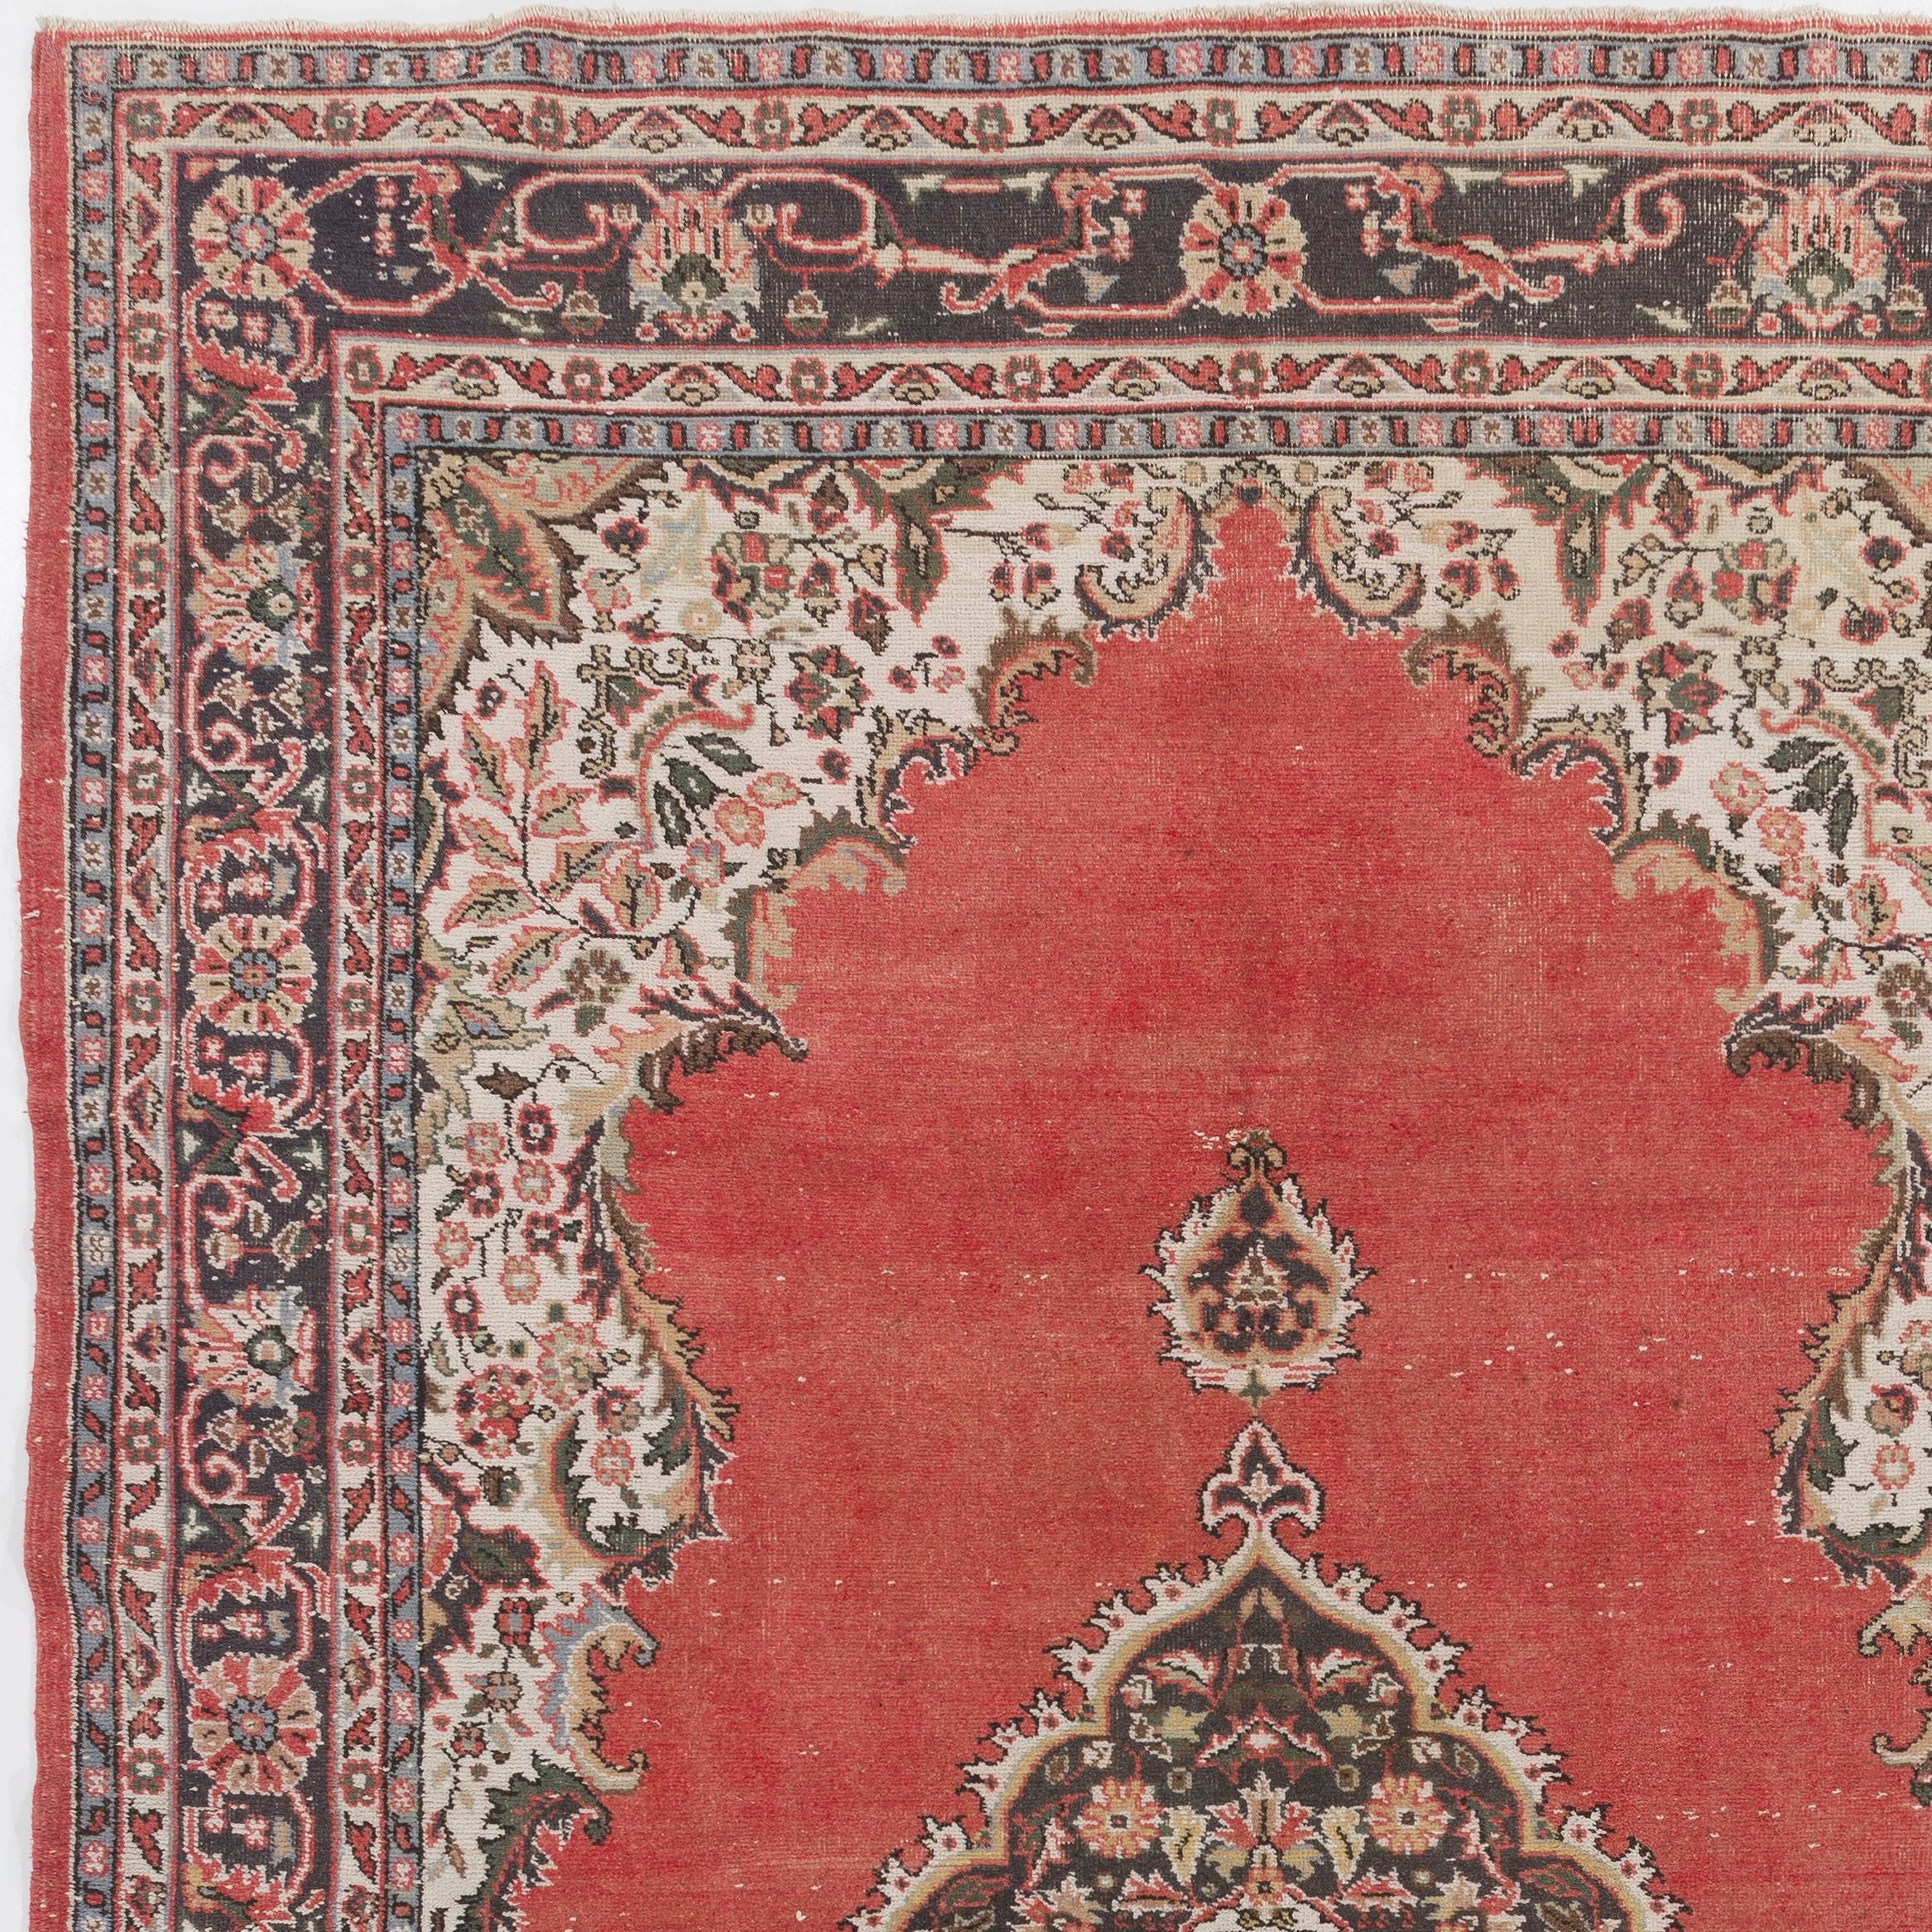 A fine vintage hand knotted Turkish Oushak rug from the 1960s featuring a central floral medallion in dull navy blue against a plain warm madder red field, finished off with spandrels in cream and a border in olive green and navy blue both filled